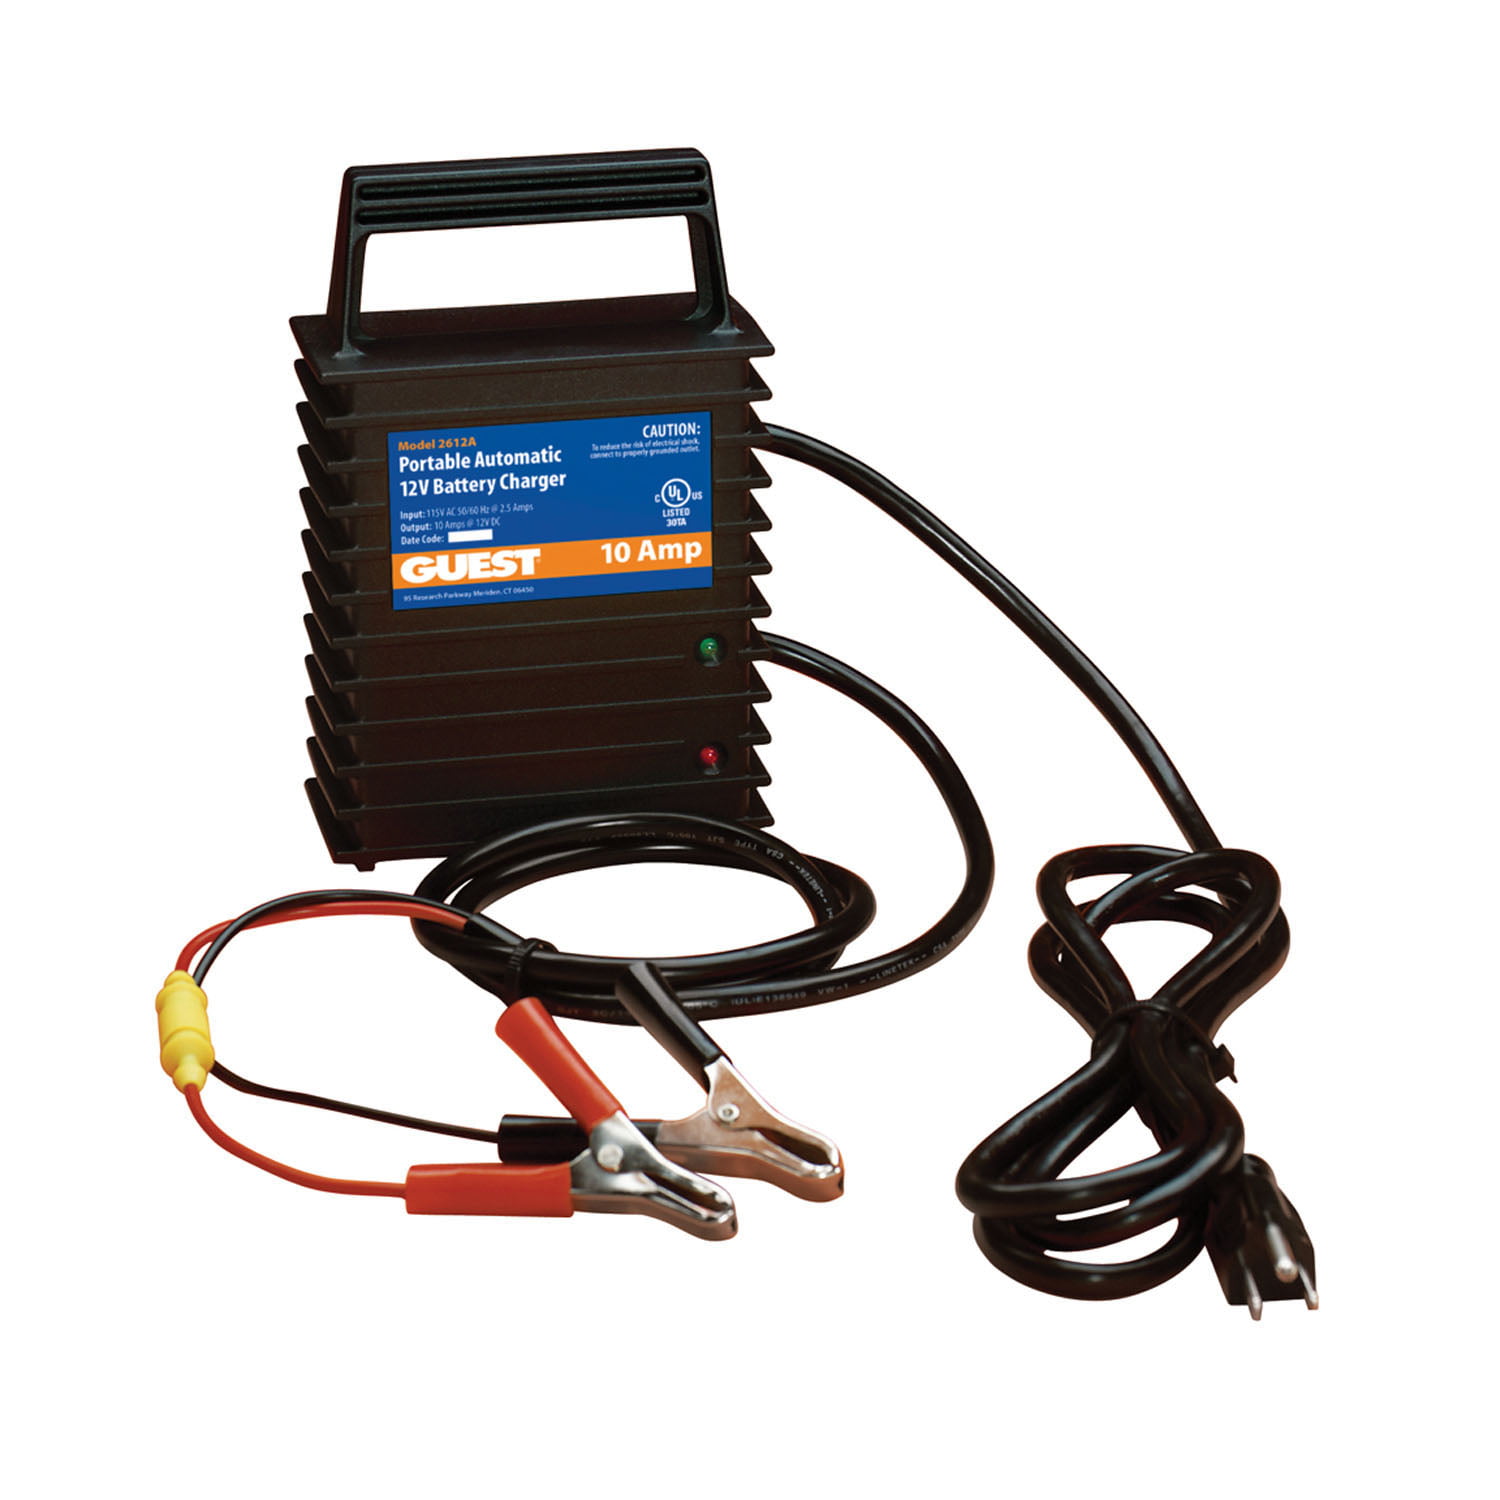 Portable battery. Marine Battery Charger. Marine Charger LF 114-M.